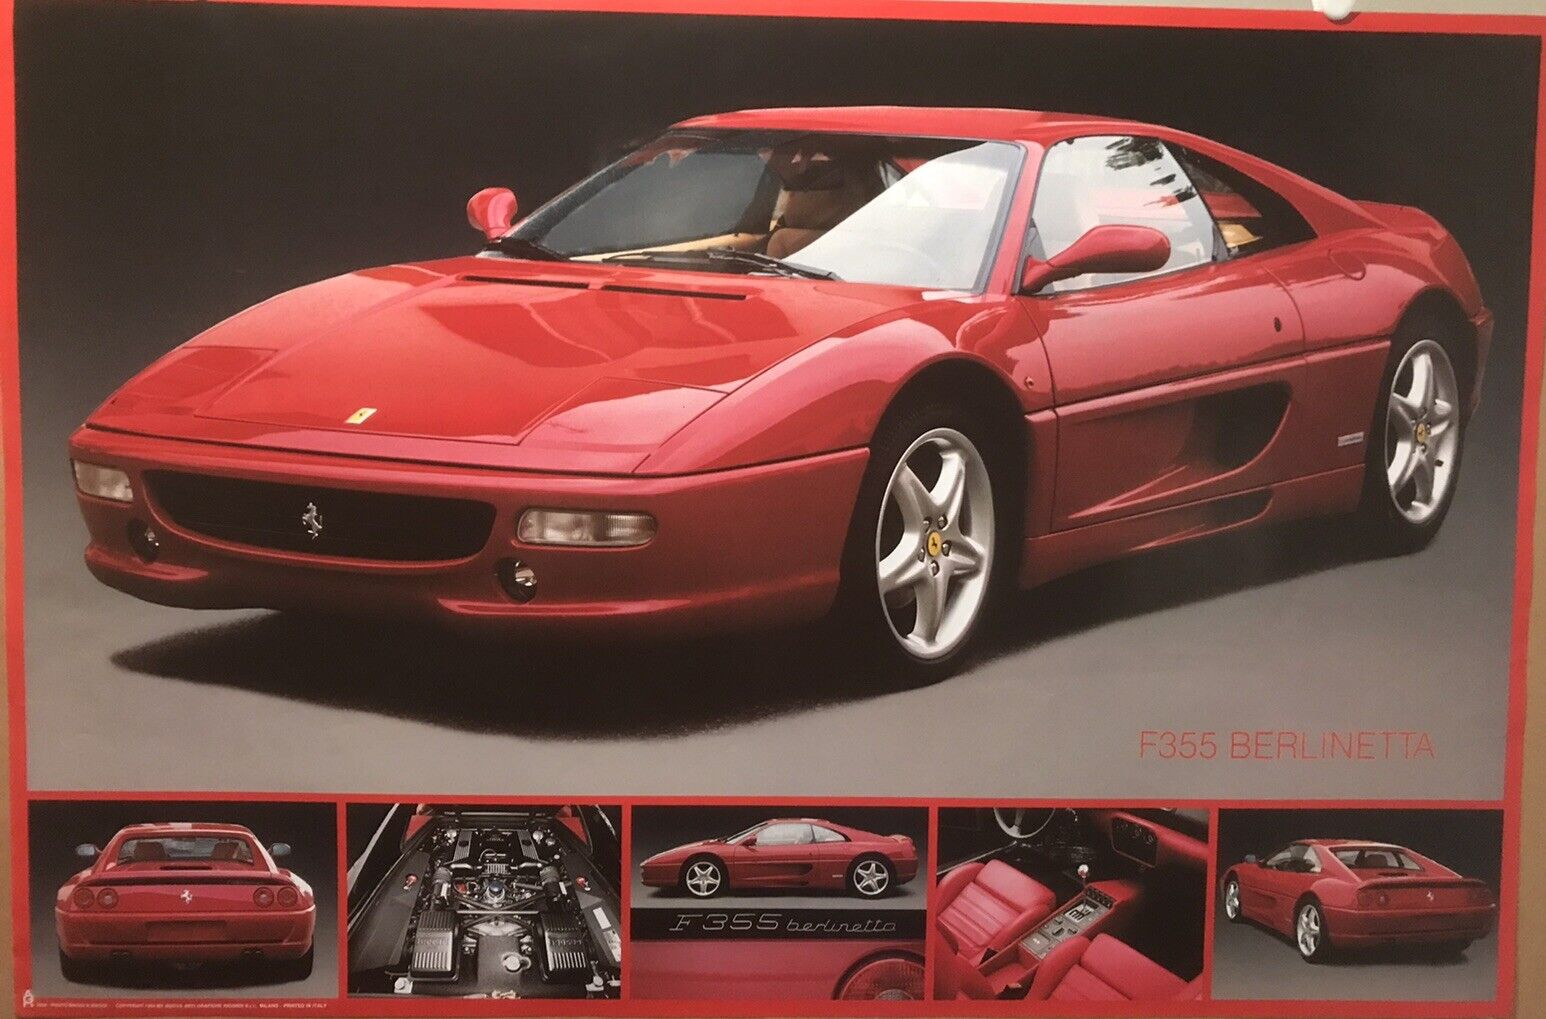 Ferrari F355 Berlinetta 24” 36” Printed In Italy Extremely Rare O/P Car Poster